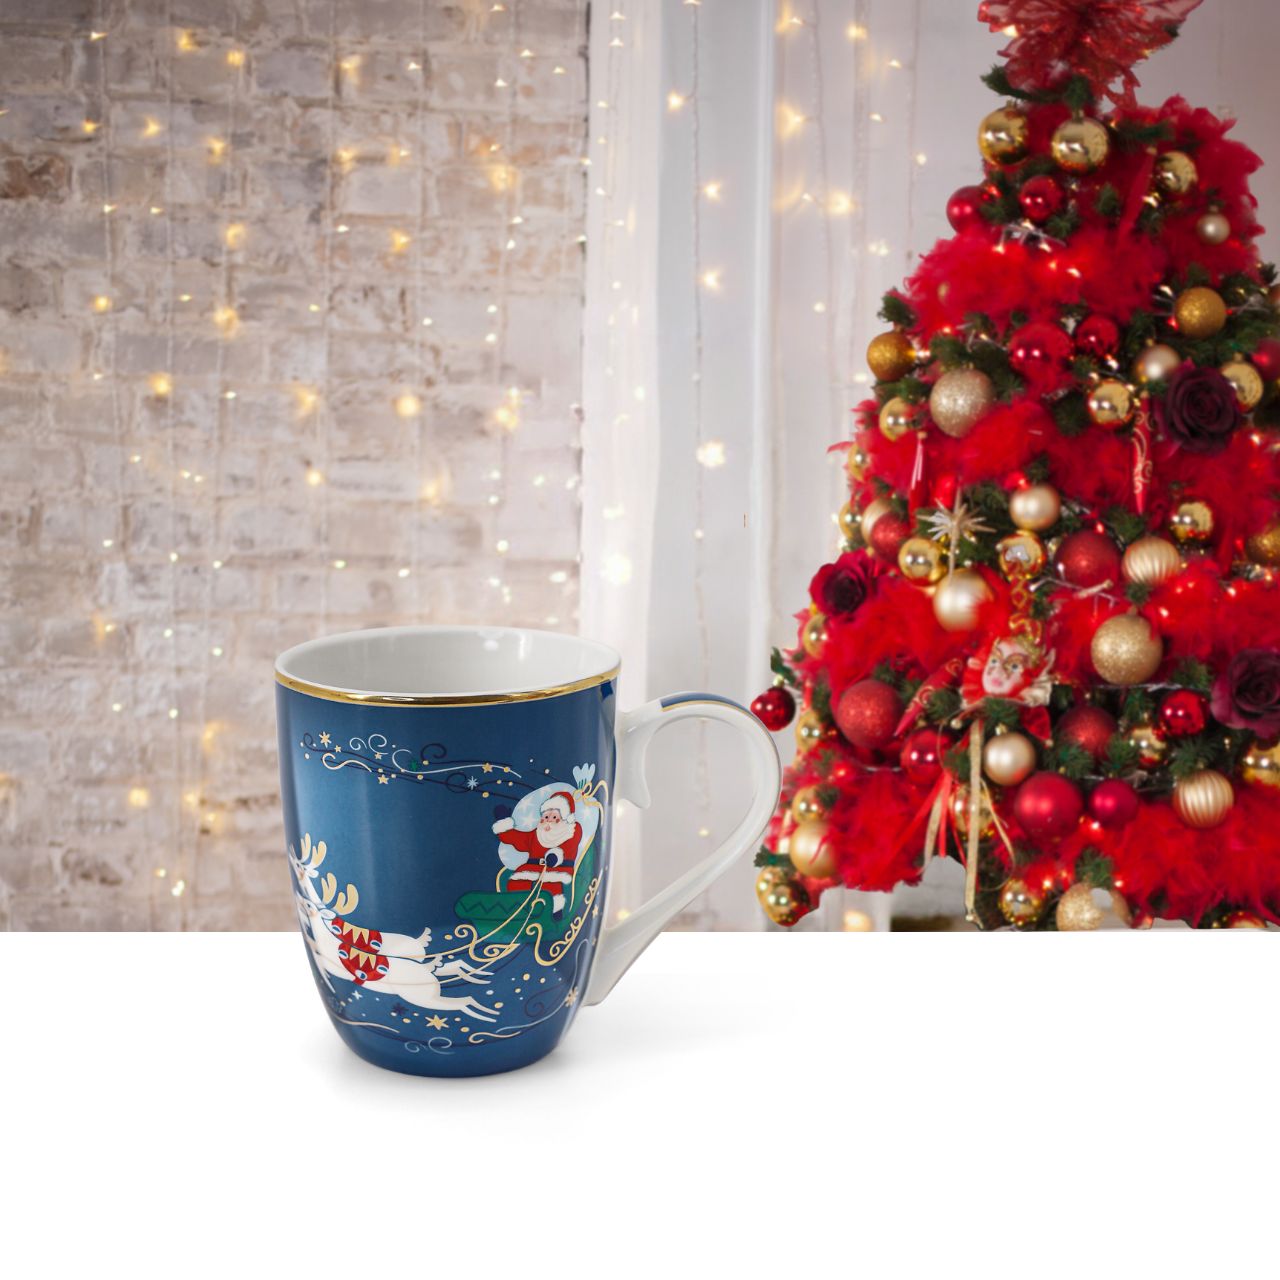 Single Christmas Mug - Santa on Sleigh by Tipperary Crystal  Gather your loved ones for a holiday celebration to remember. Our Christmas Tableware is made to bring festive happiness to lunch, dinner and every meal in between. Tipperary wishes to make these moments even more magical.